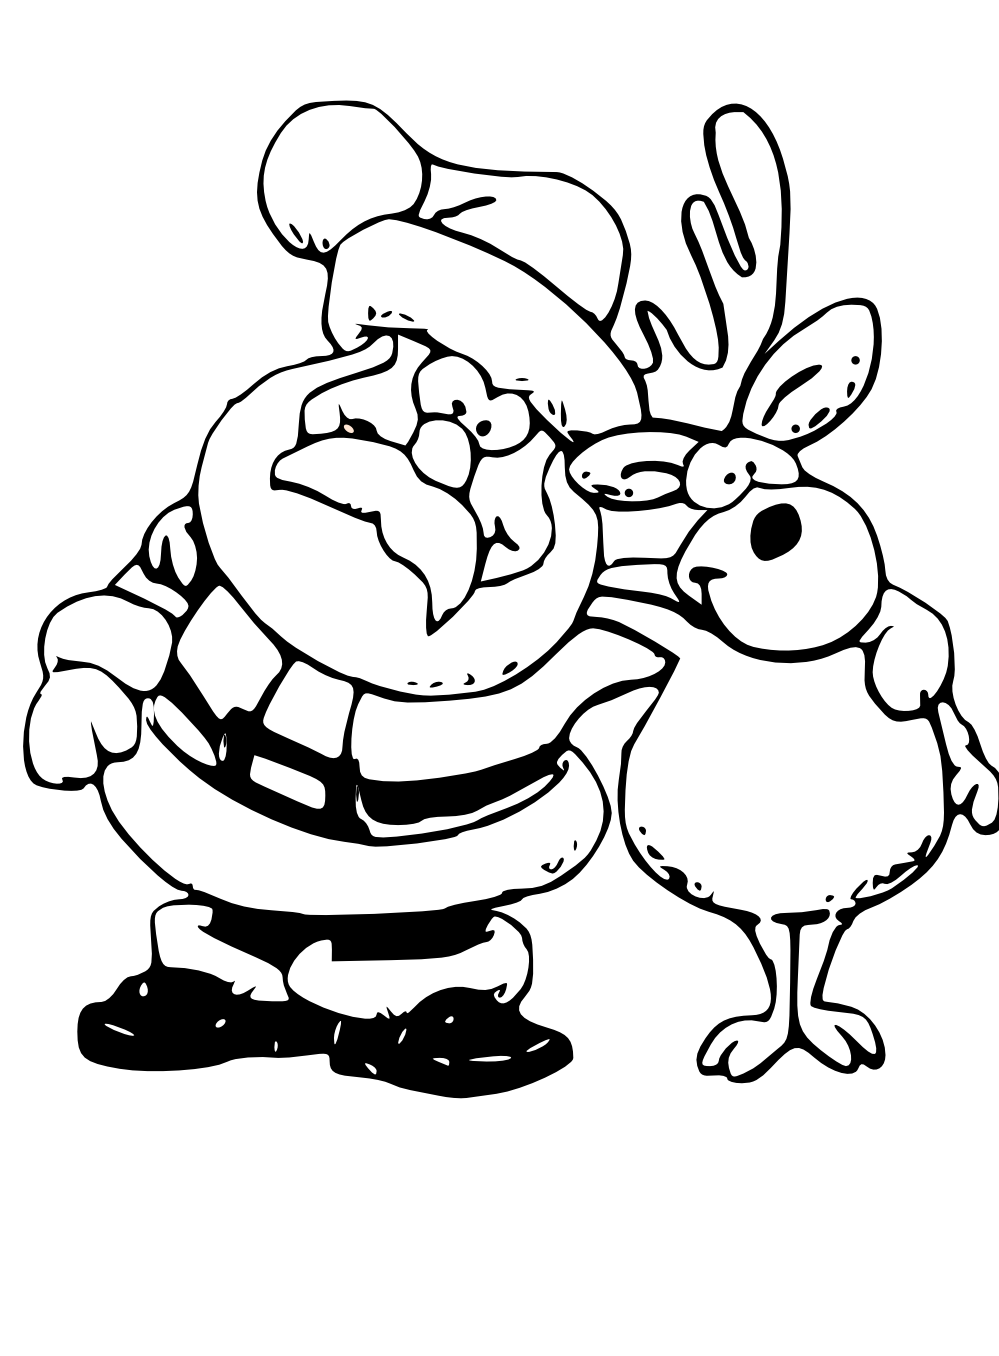 Clipart reindeer black and white. Dr seuss free download